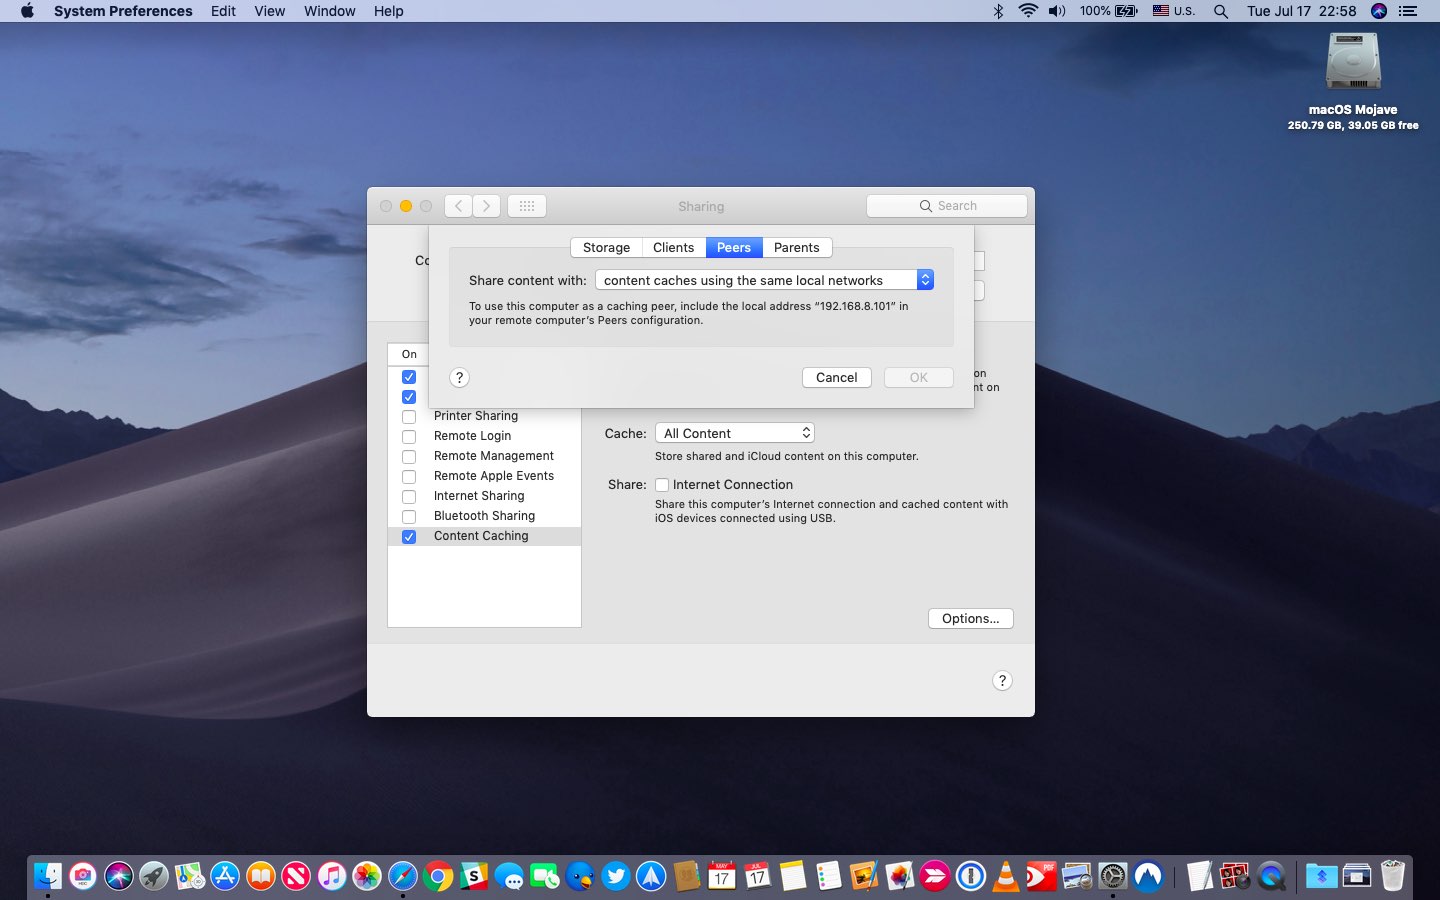 A screenshot showing content caching options for peers in macOS Mojave